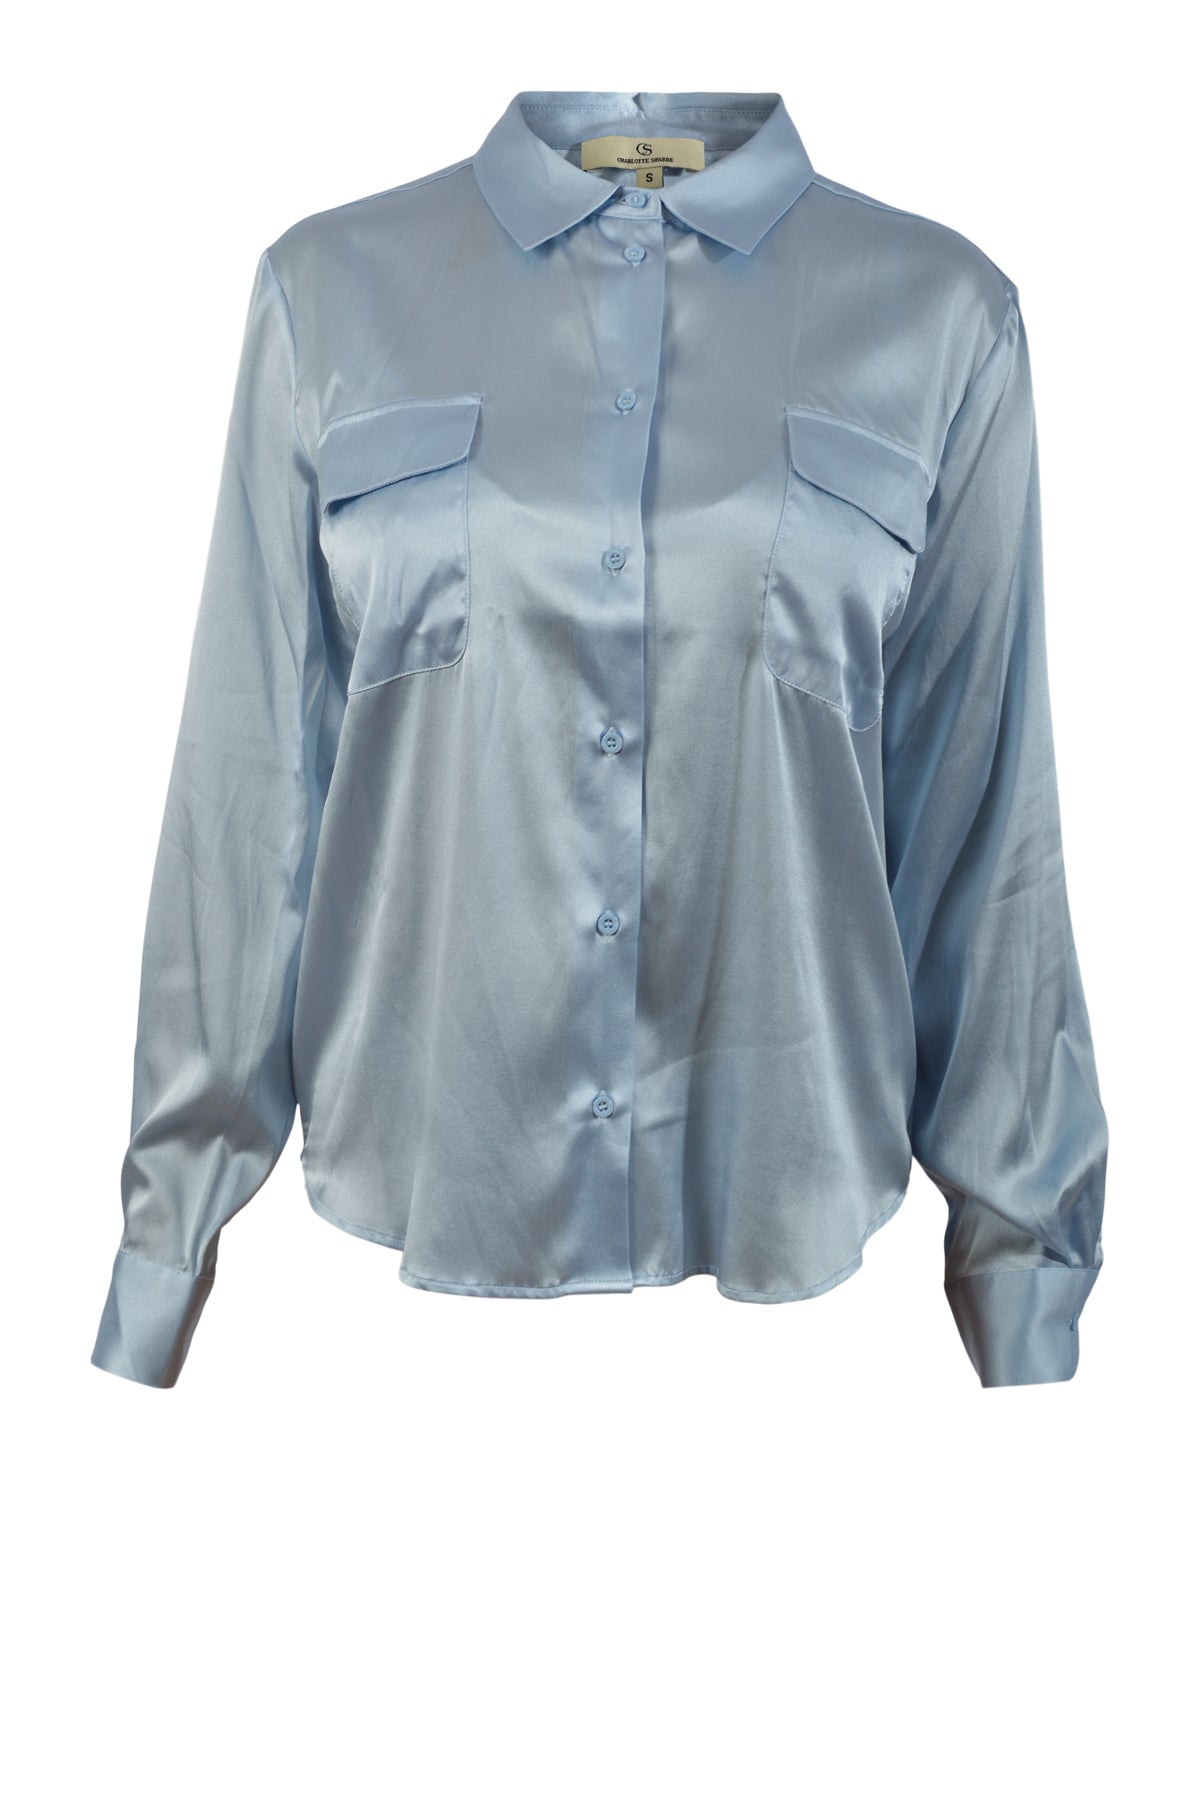 Charlotte Sparre Classic Shirt 2622 Solid, Blue